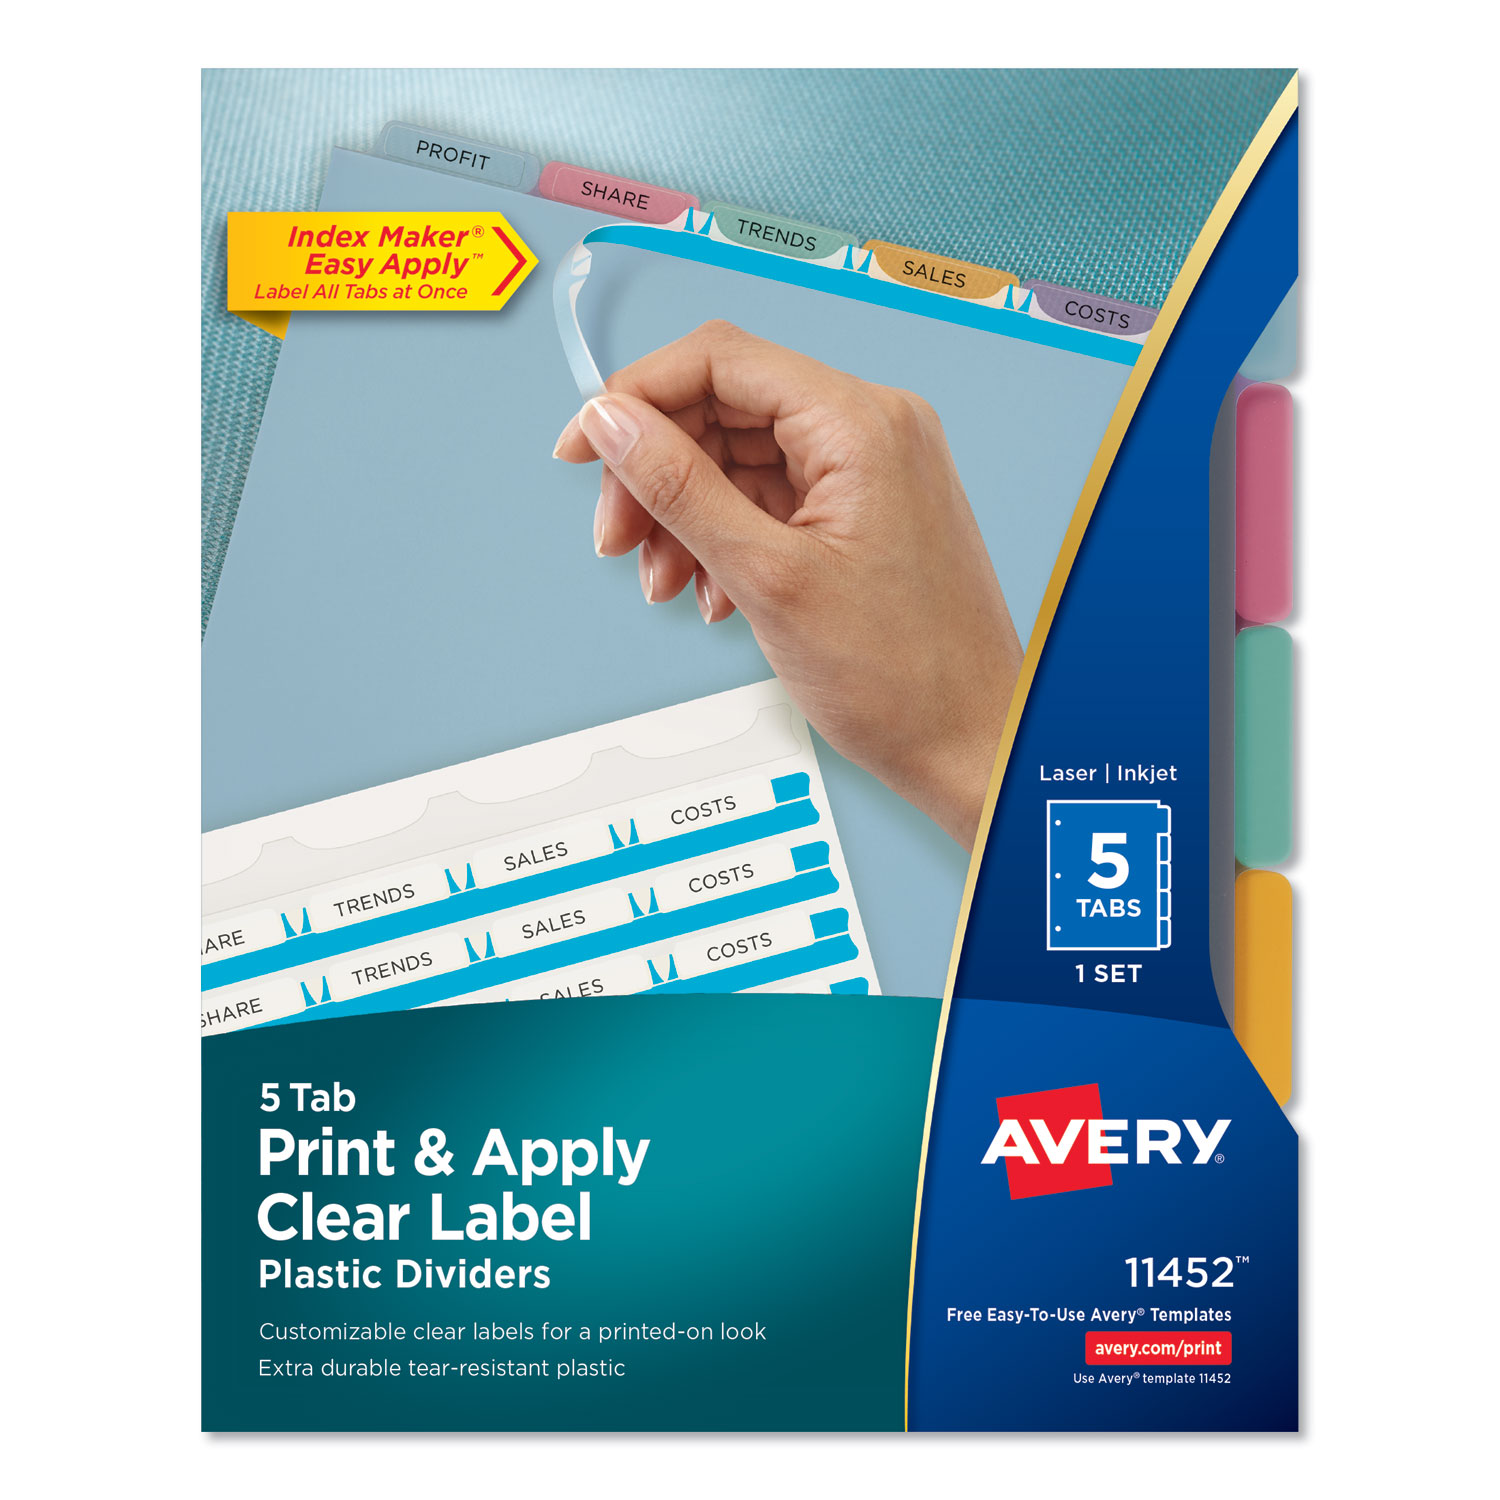  Avery 11452 Print and Apply Index Maker Clear Label Plastic Dividers with Printable Label Strip, 5-Tab, 11 x 8.5, Translucent, 1 Set (AVE11452) 